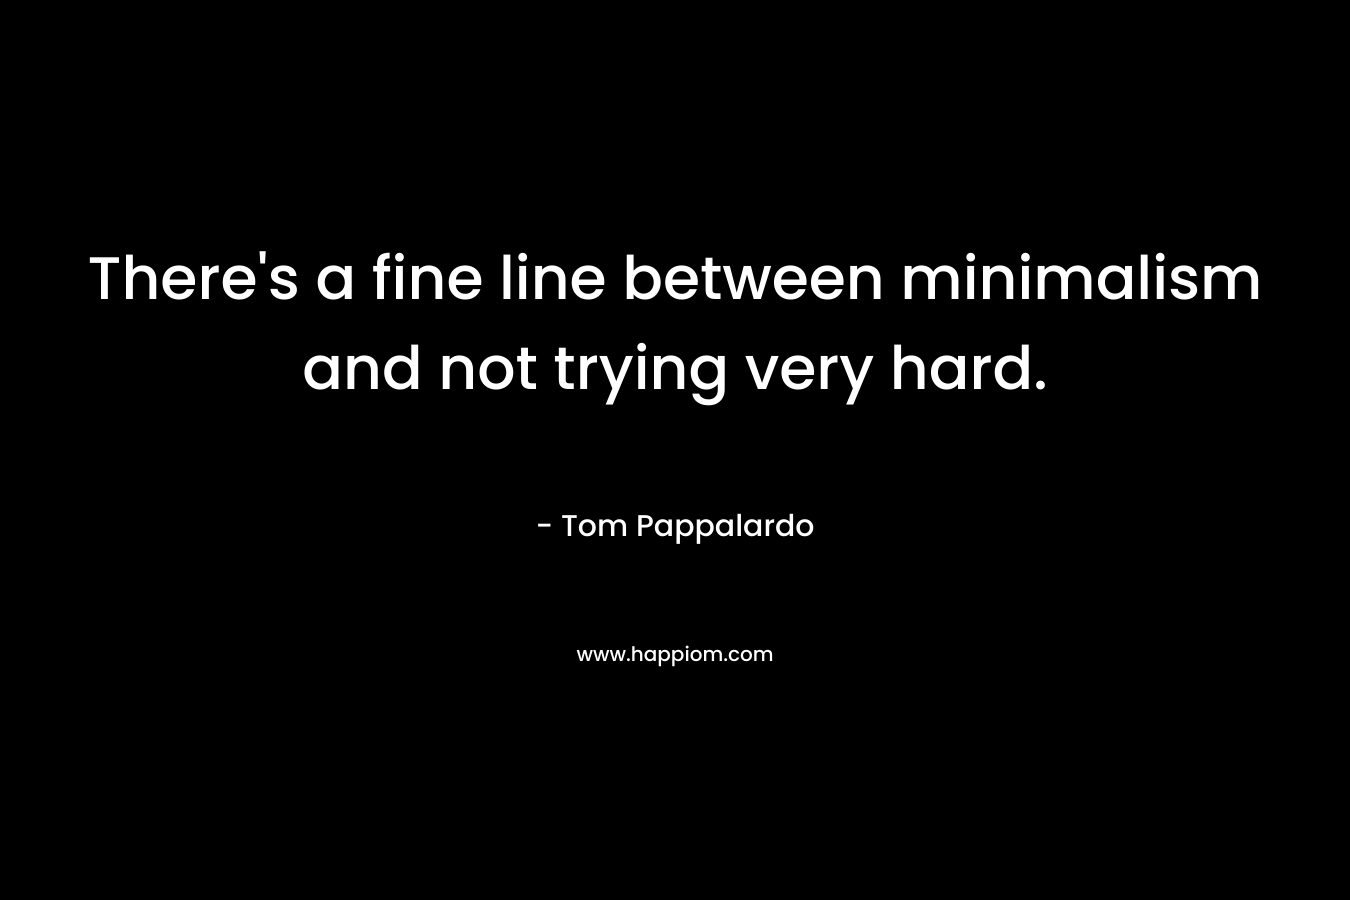 There’s a fine line between minimalism and not trying very hard. – Tom Pappalardo